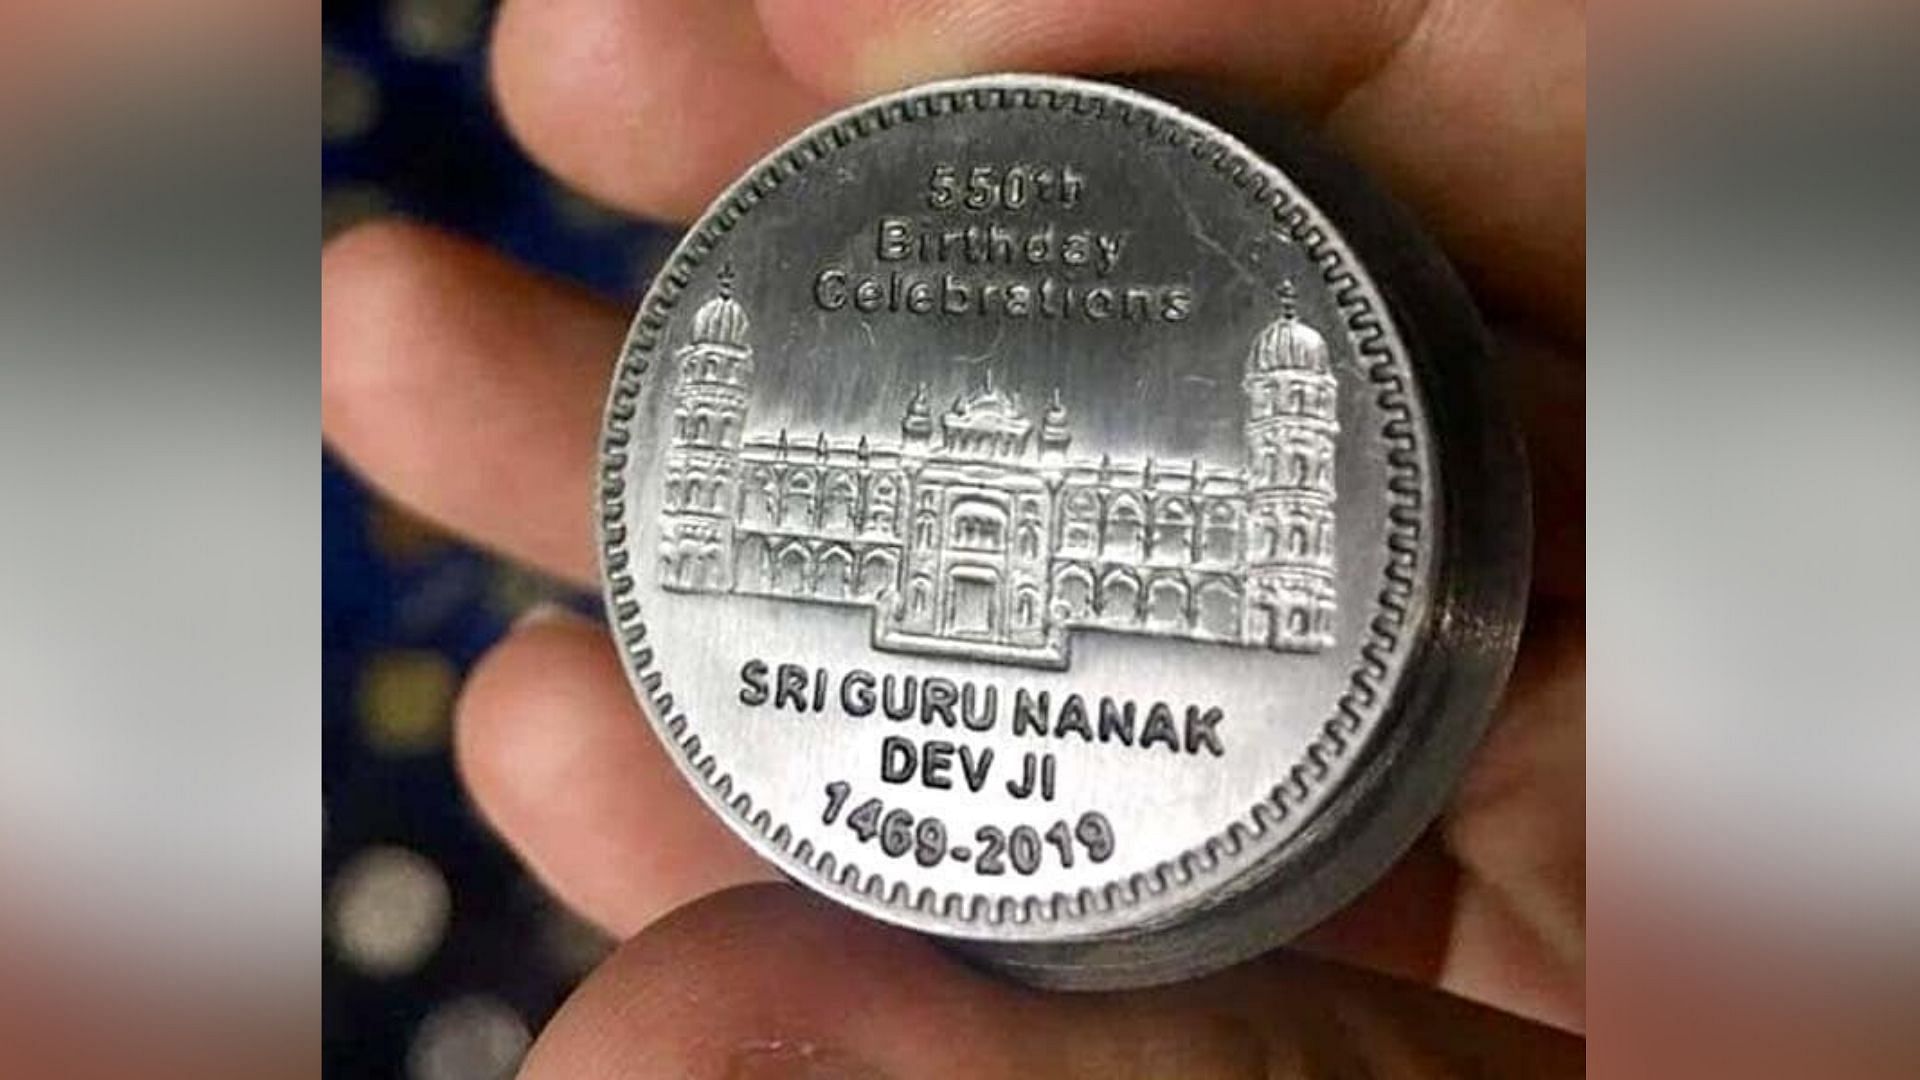 Pakistan on Wednesday issued a commemorative coin to mark Guru Nanak’s 550th birth anniversary in November.